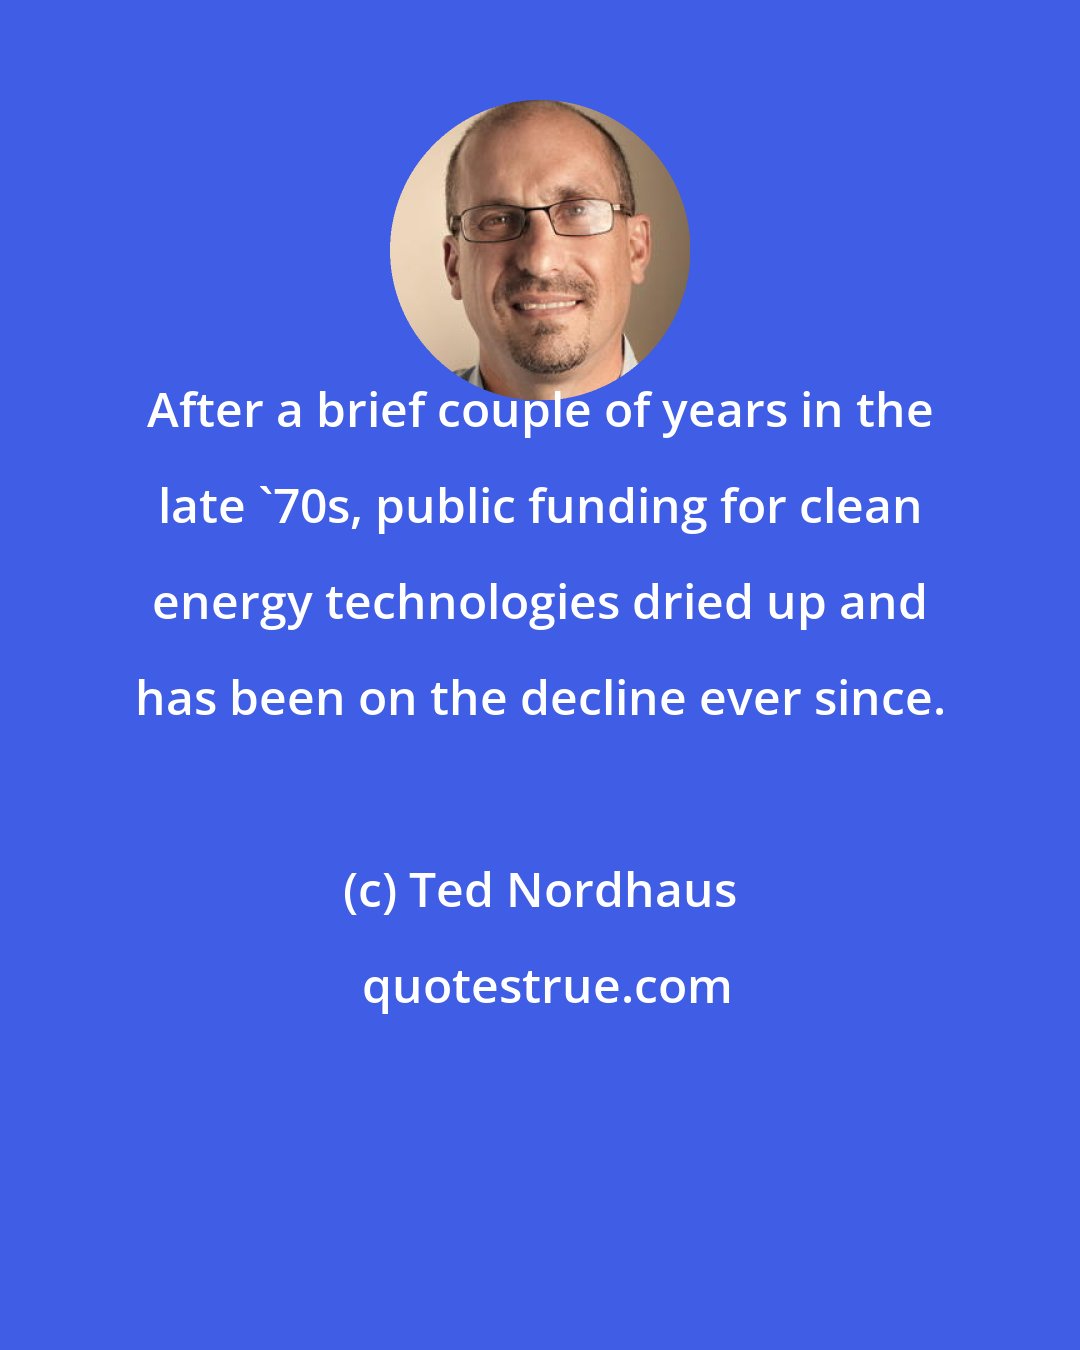 Ted Nordhaus: After a brief couple of years in the late '70s, public funding for clean energy technologies dried up and has been on the decline ever since.